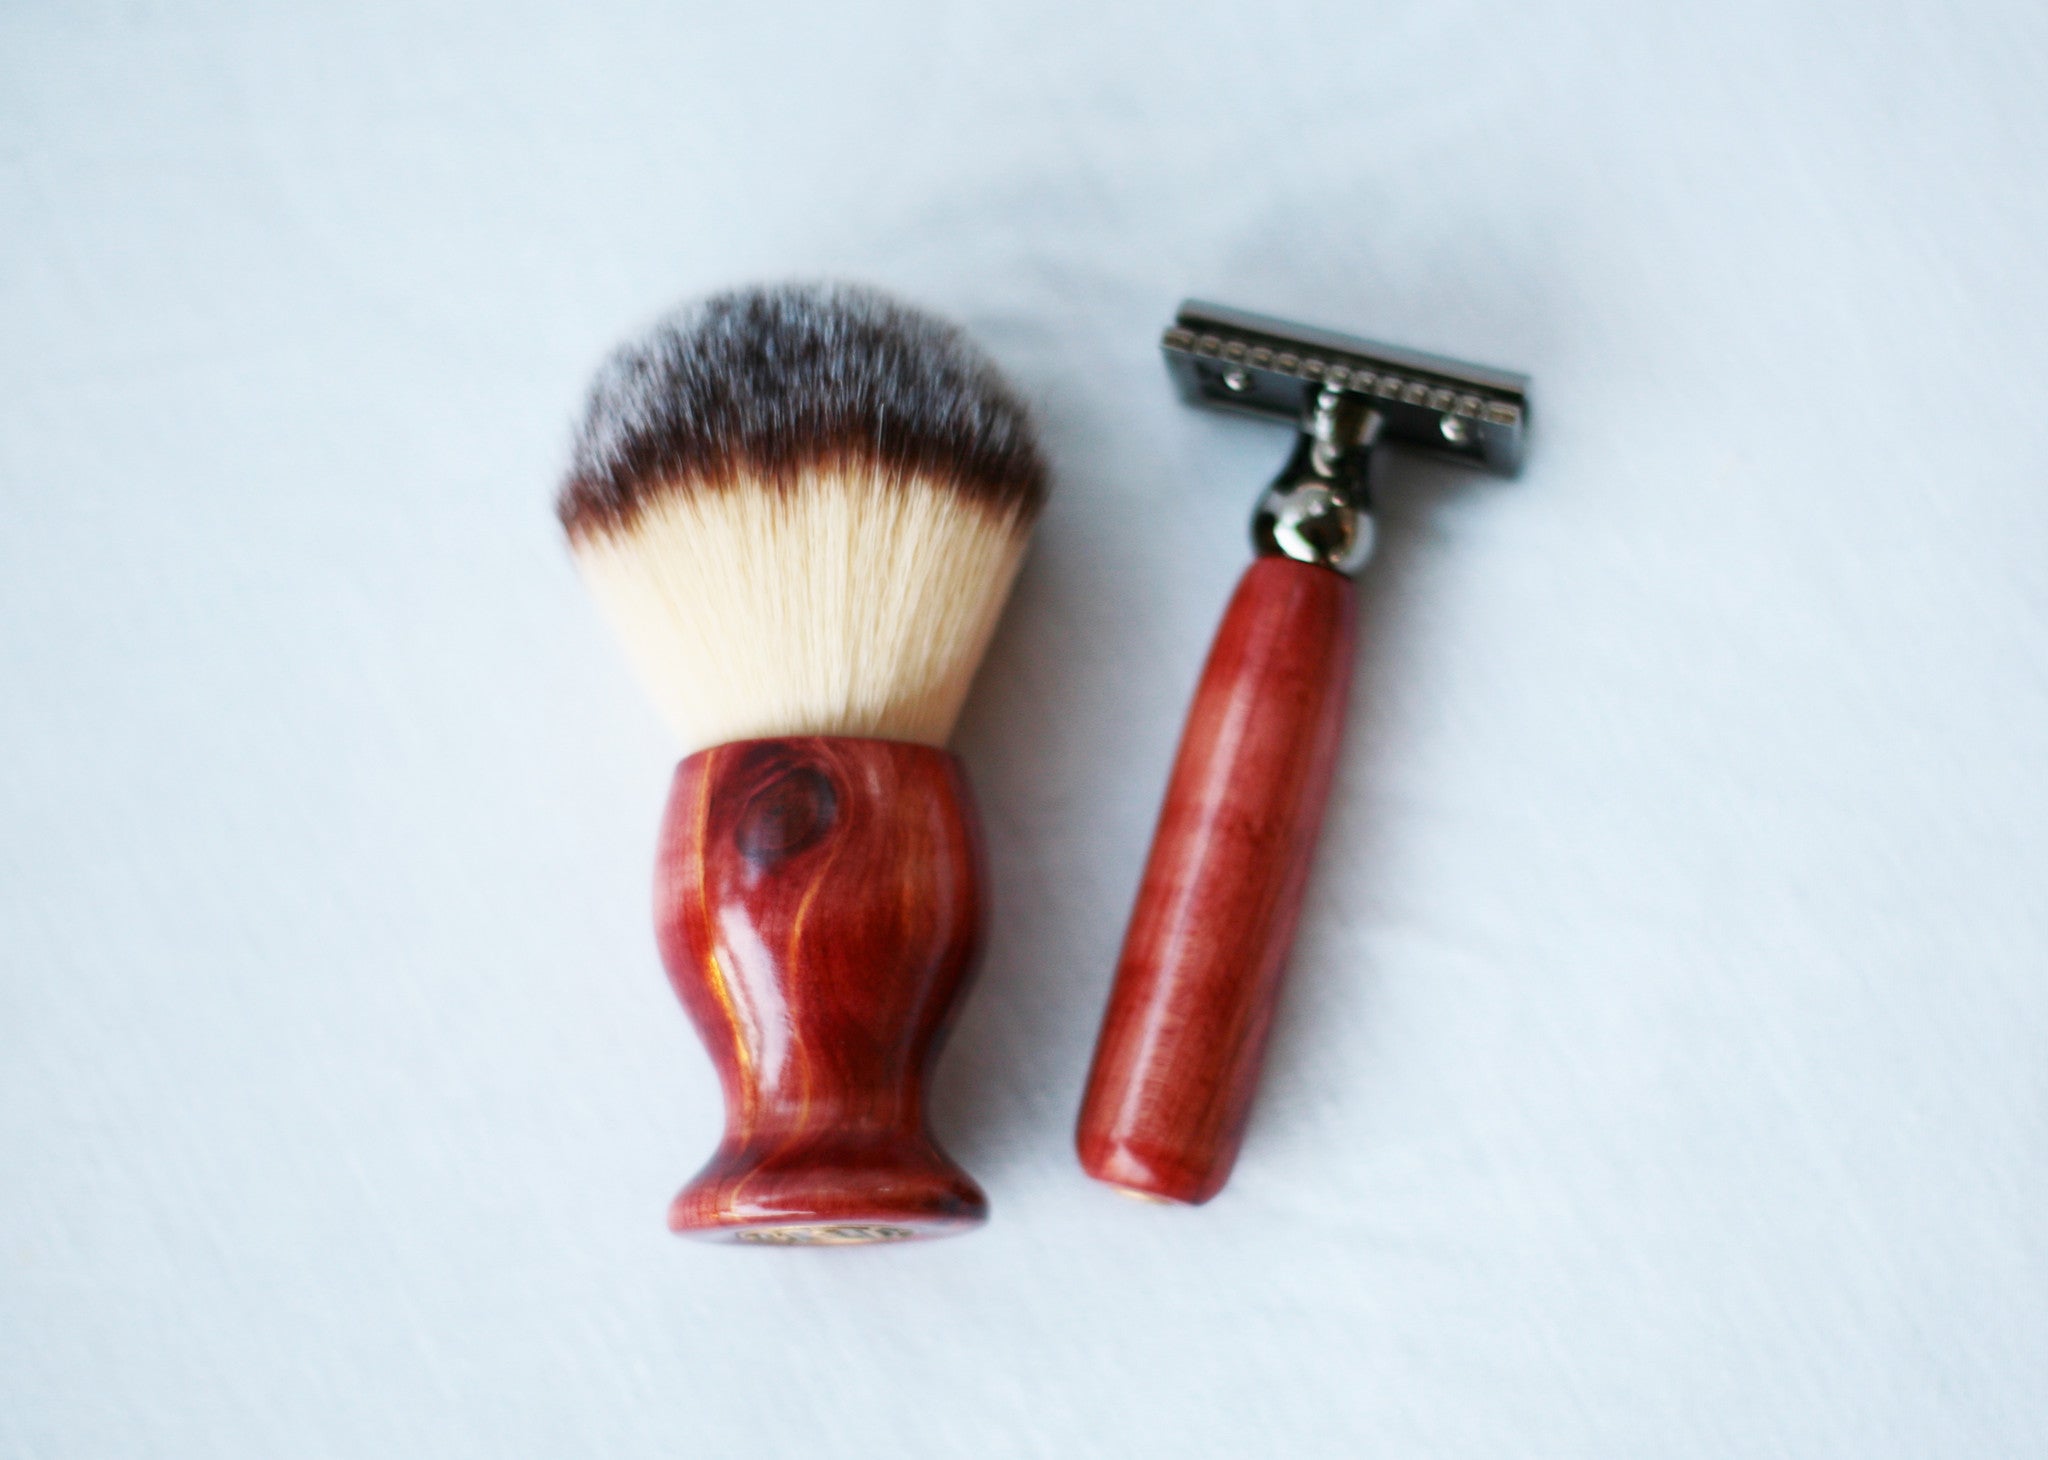 Aromatic Red Cedar Shave Set, safety razor, 26mm lather brush and a matching shave stand. - CreationsByWill